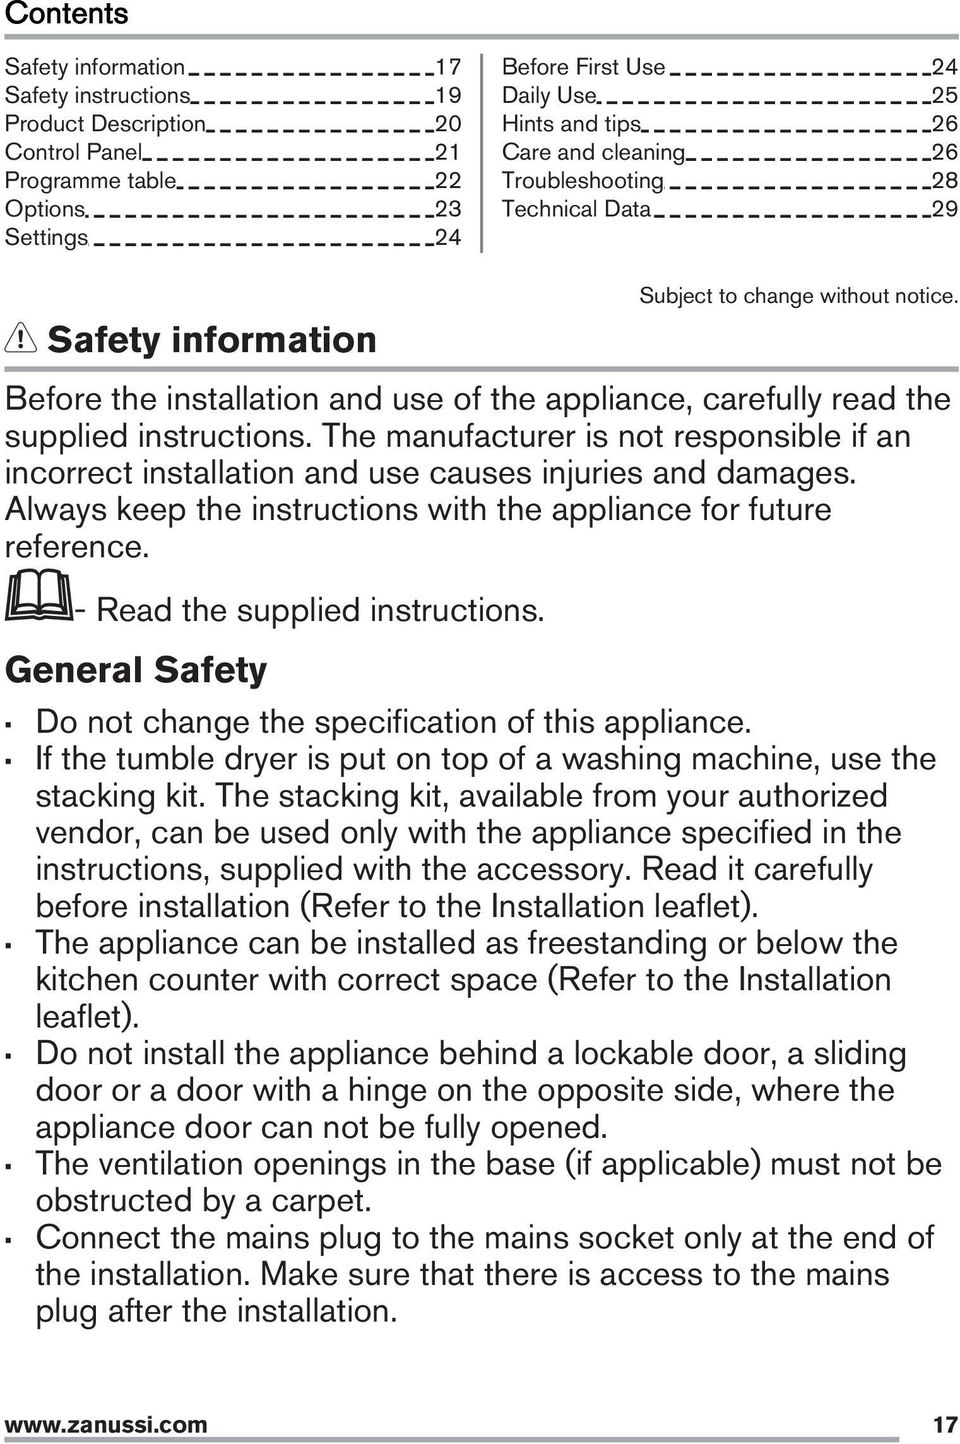 The manufacturer is not responsible if an incorrect installation and use causes injuries and damages. Always keep the instructions with the appliance for future reference.